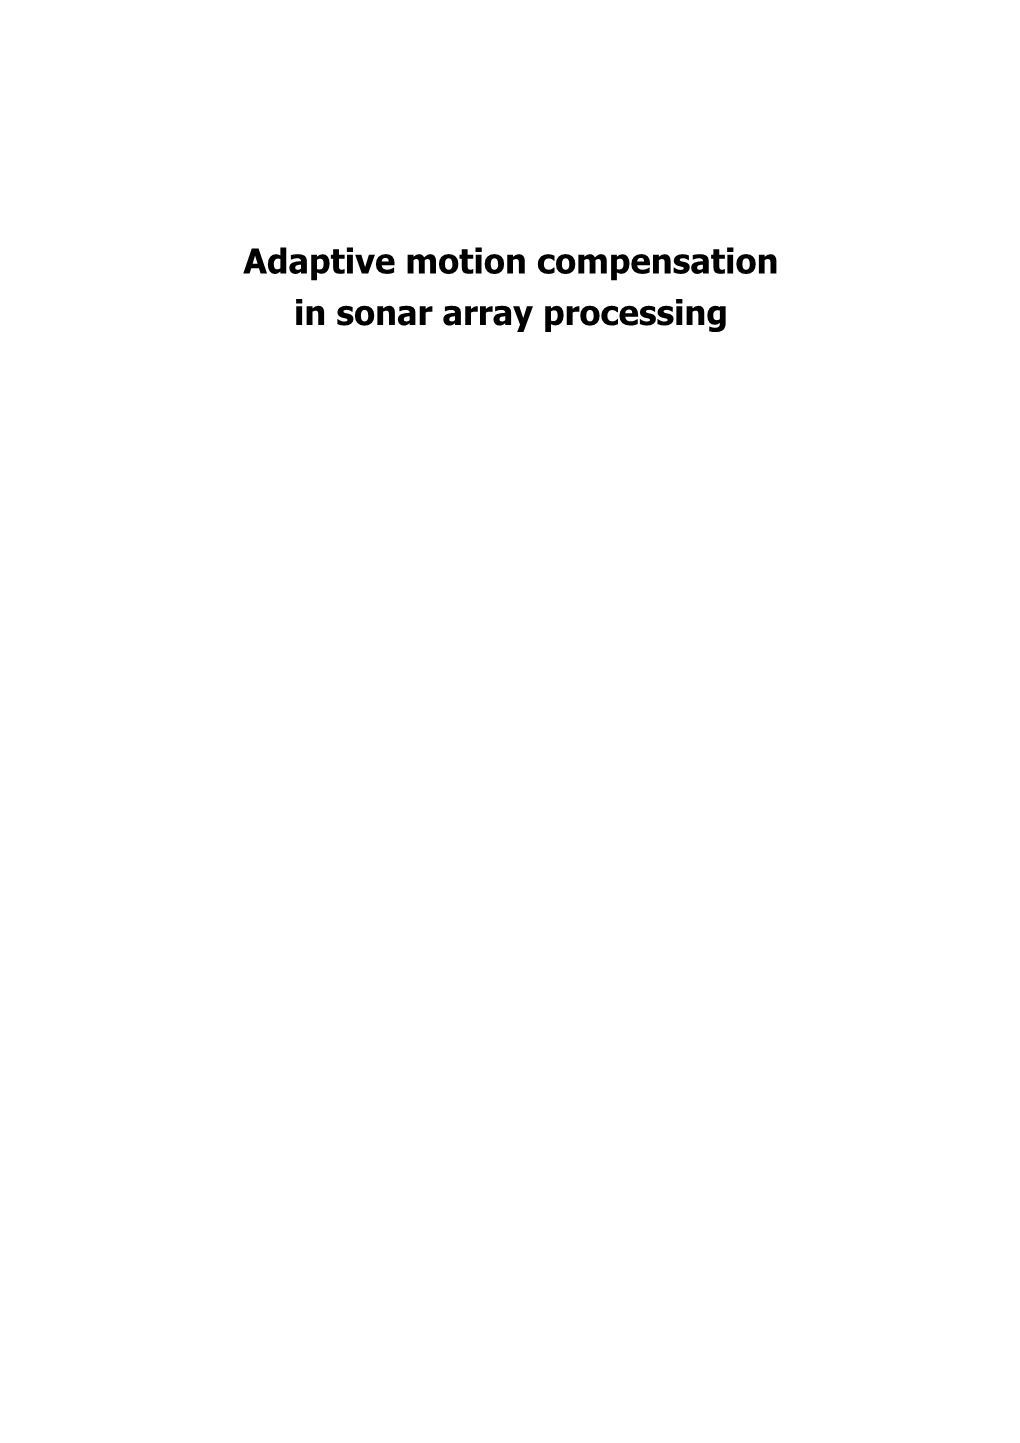 Adaptive Motion Compensation in Sonar Array Processing